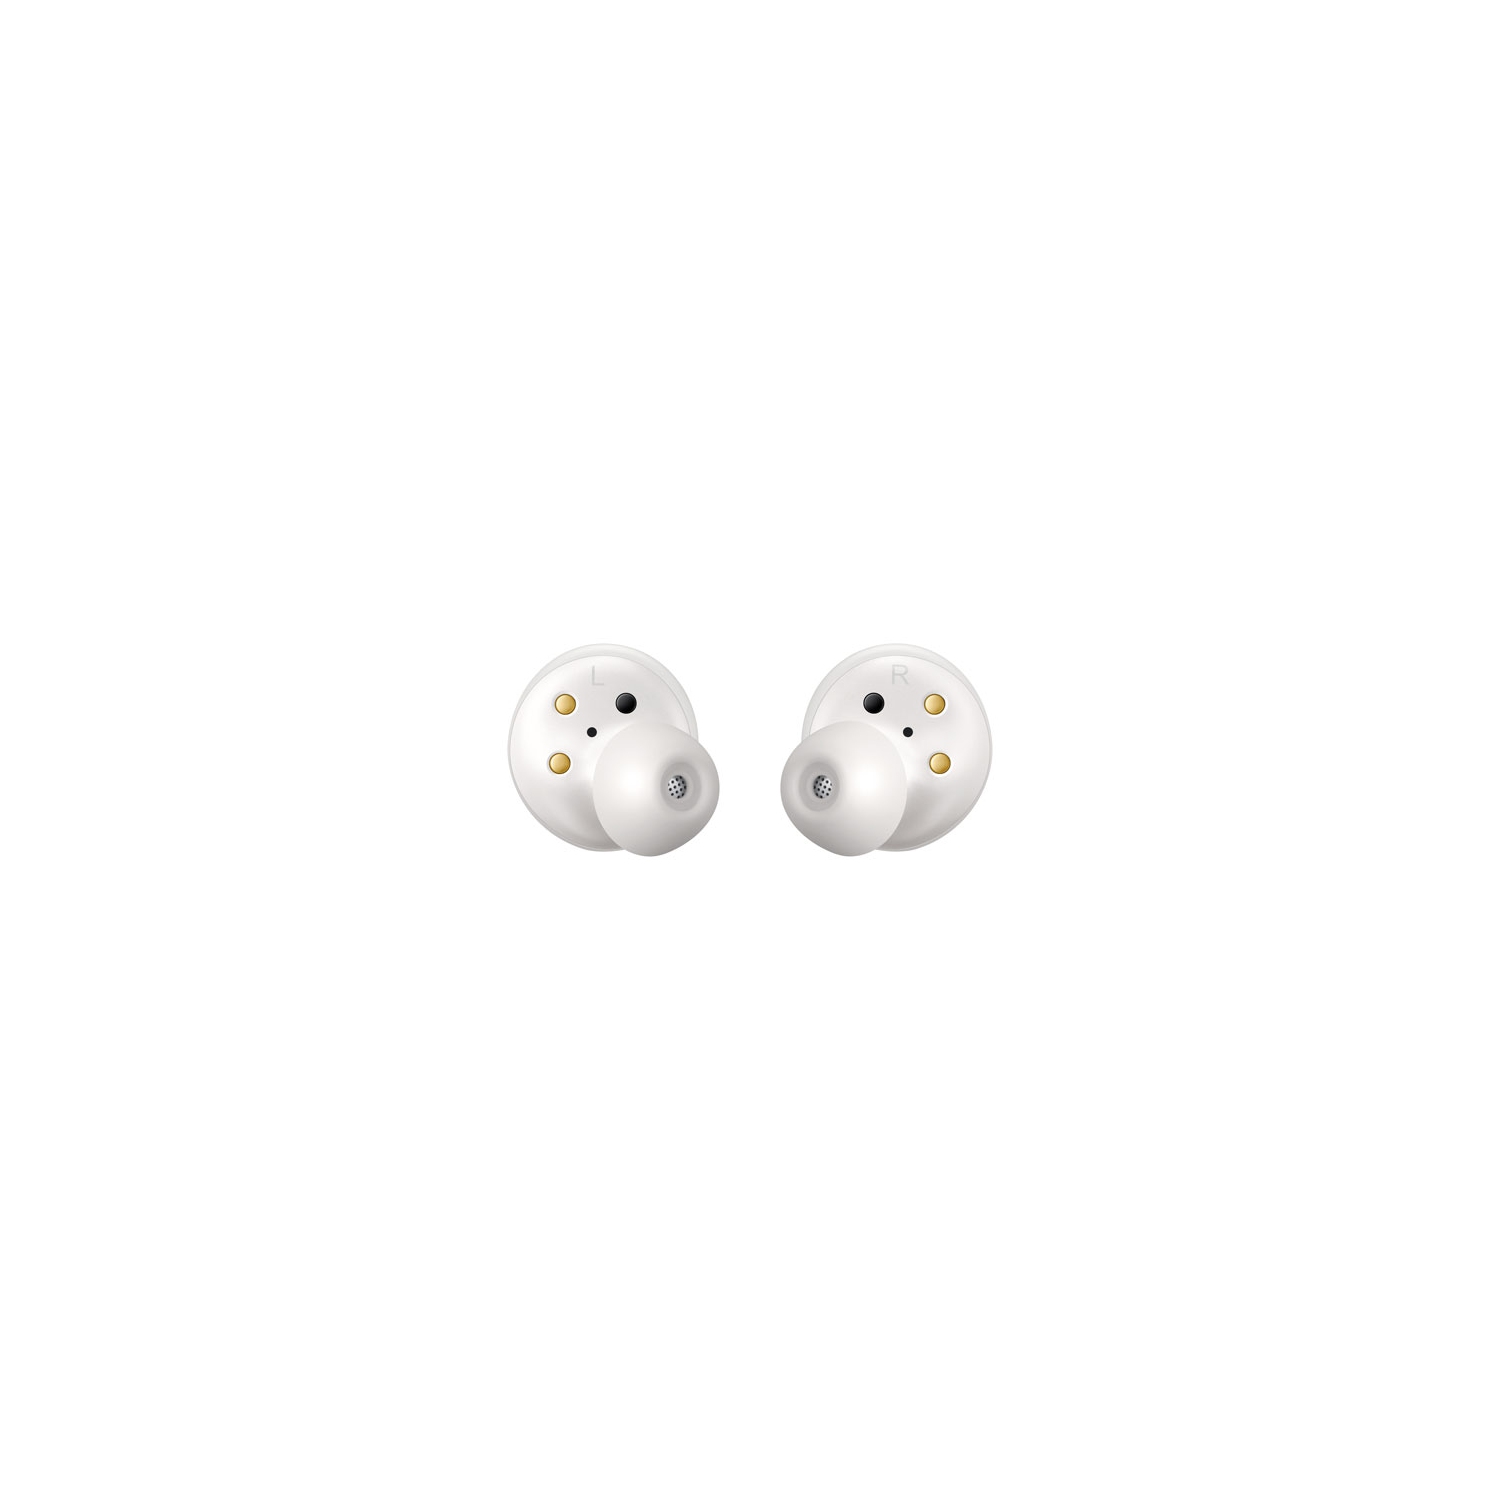 Open Box - Samsung Galaxy Buds In-Ear Sound Isolating True Wireless Earbuds - White 10/10